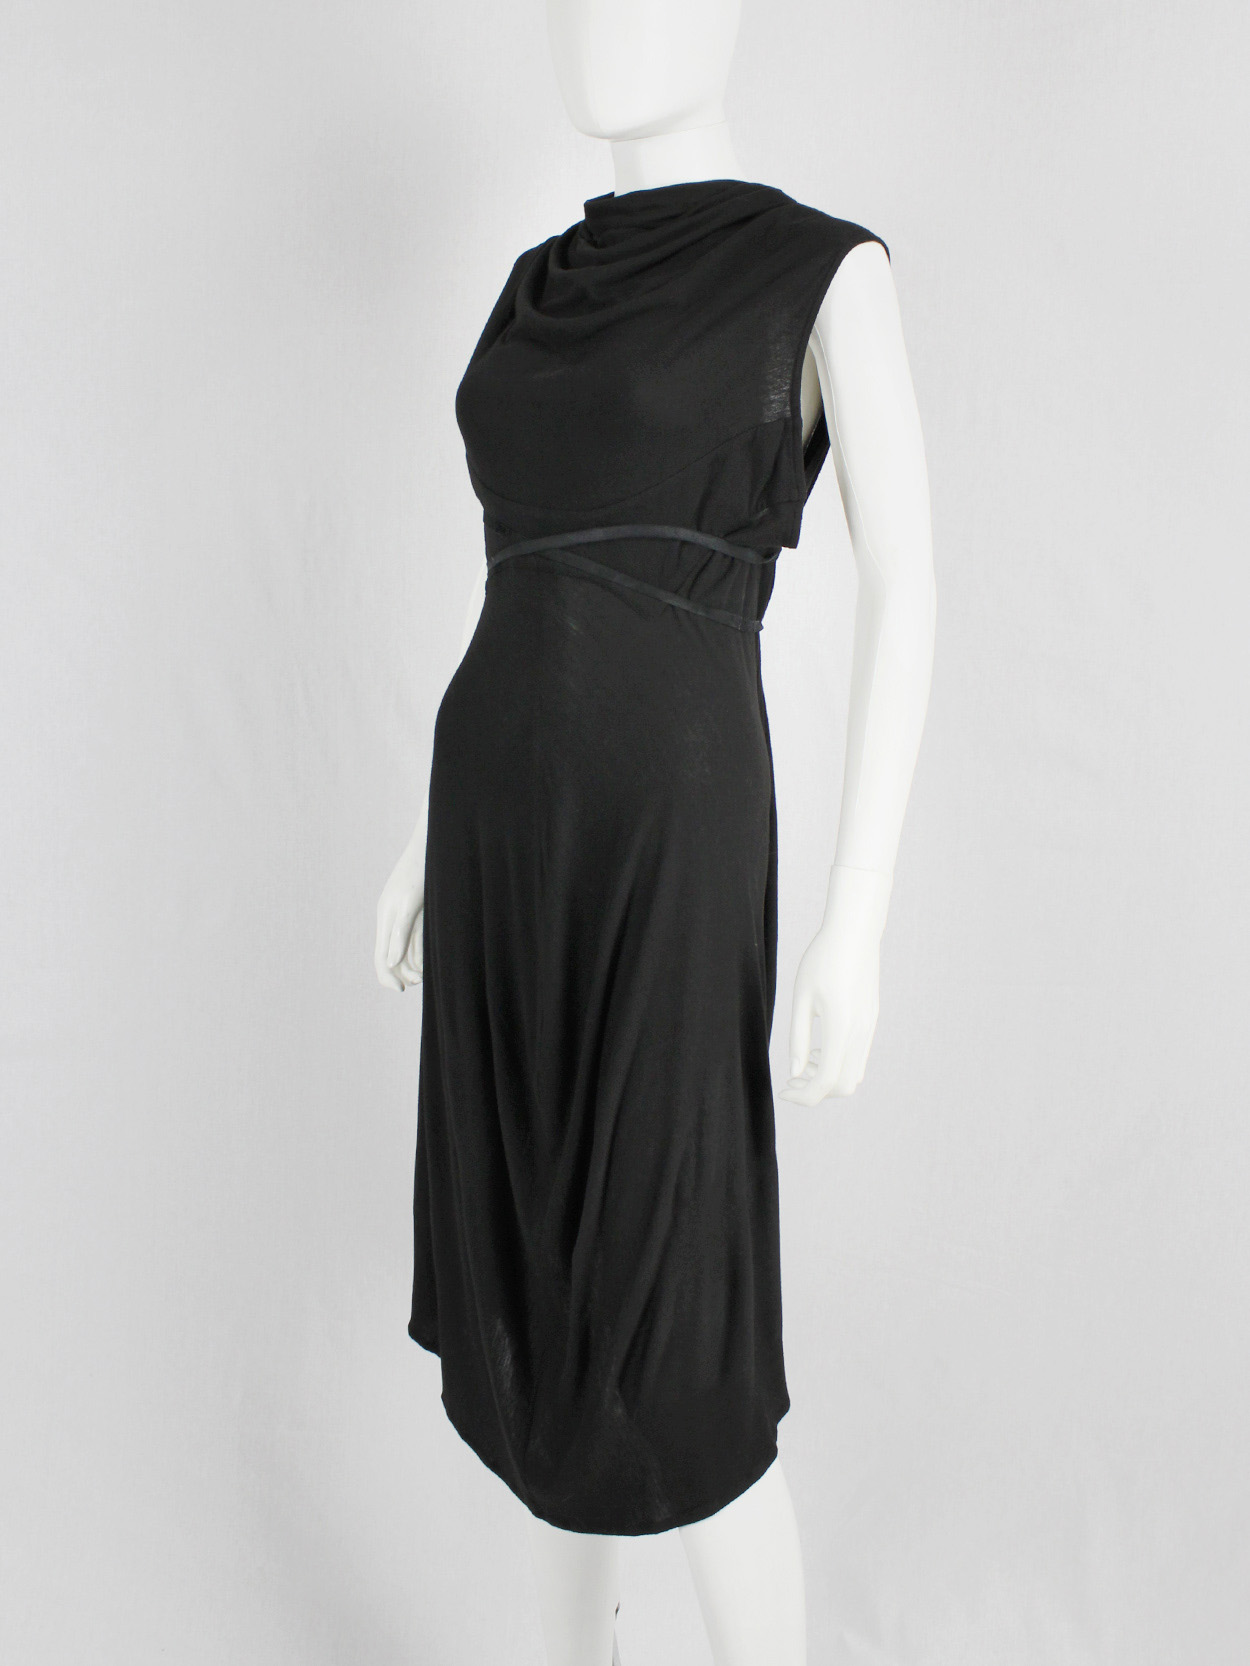 vaniitas vintage Ann Demeulemeester black grecian dress with open back and leather straps (6)